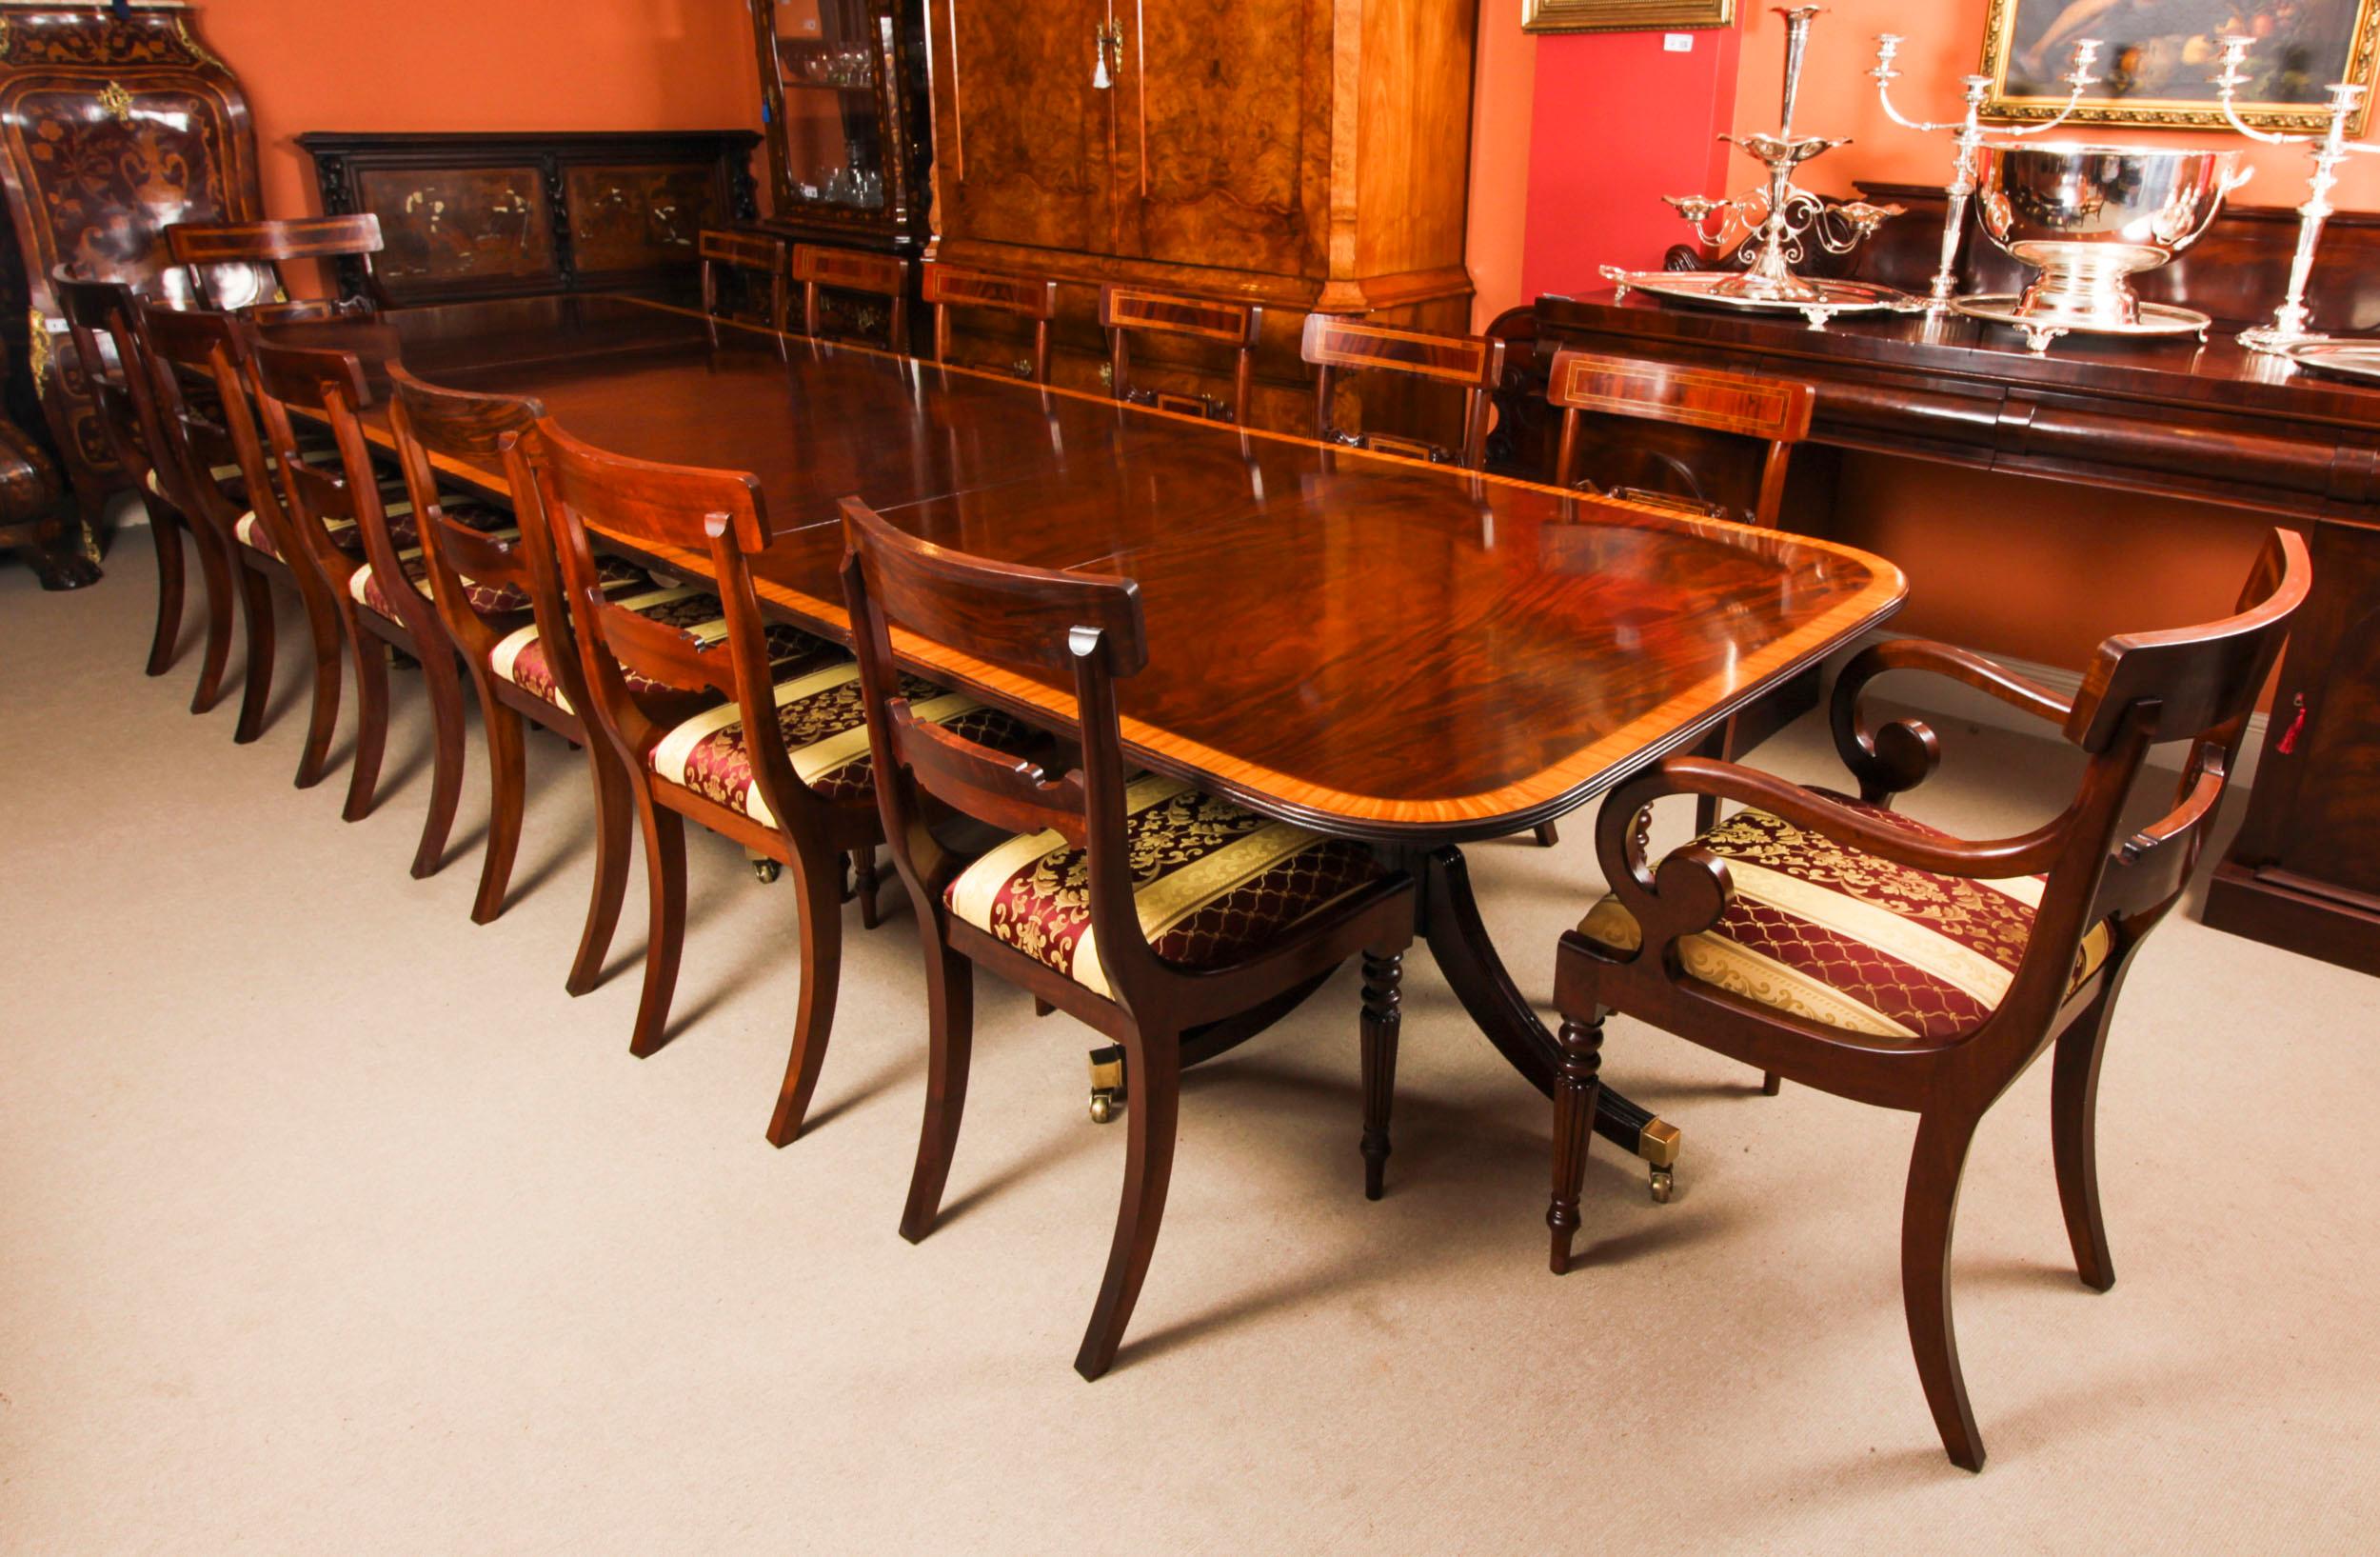 This is a superb 13ft Vintage Regency Revival dining table dating from the second half of the 20th Century.

The tabletop was crafted in flame mahogany and features superb satinwood crossbanded decoration. The table has two leaves which can be added